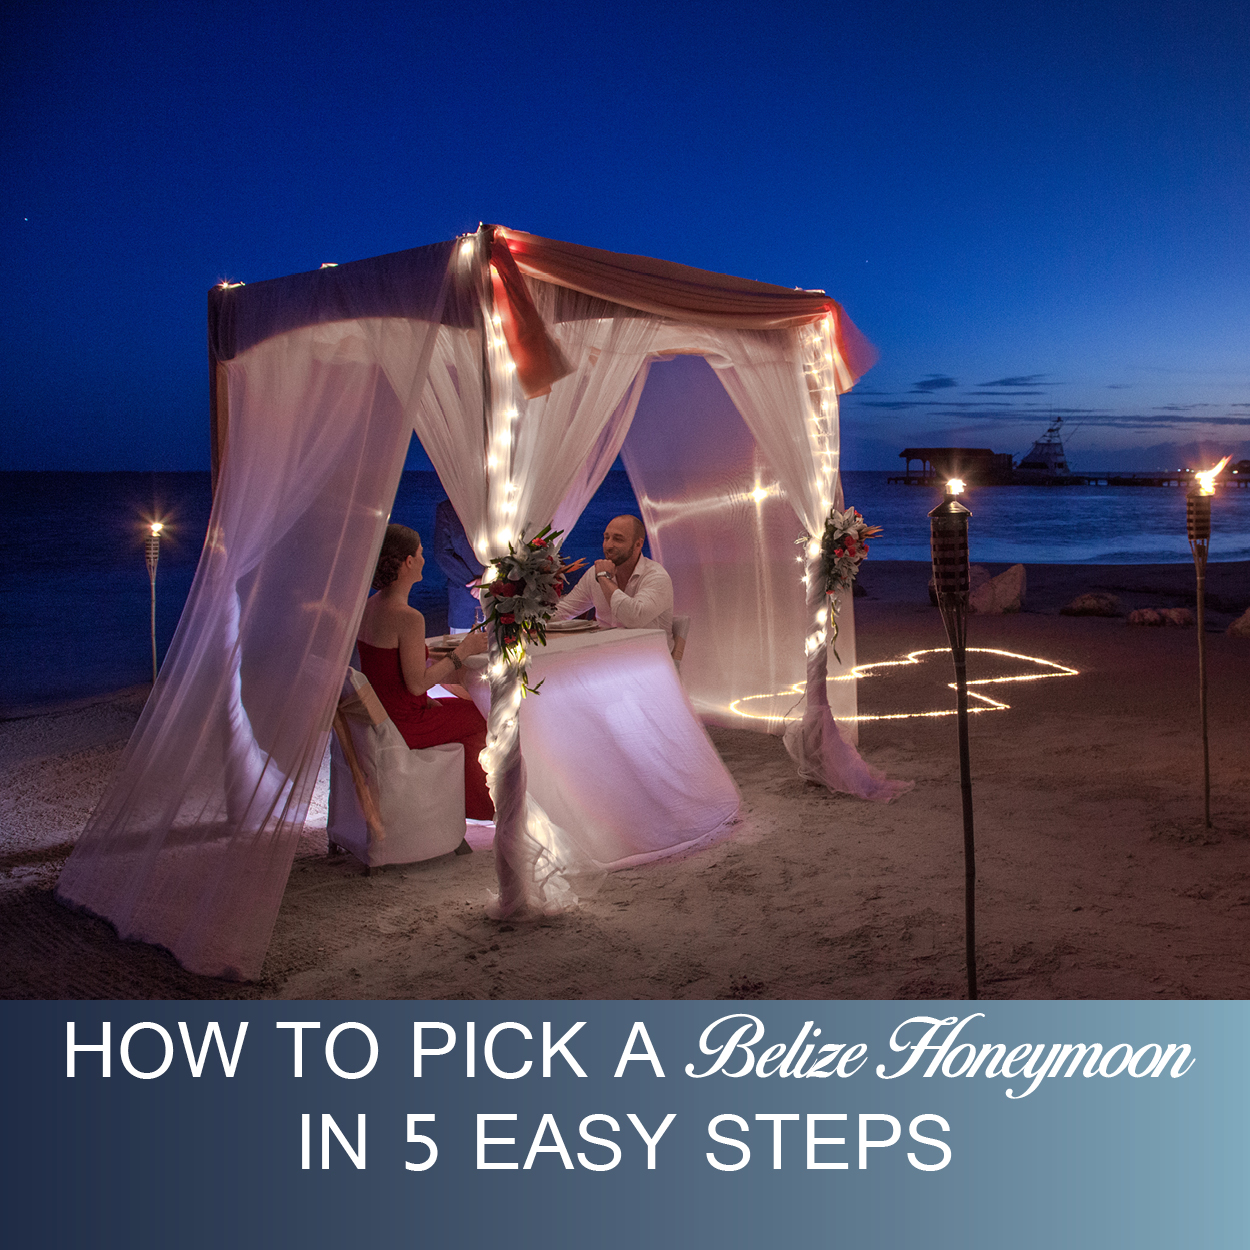 How-to-pick-a-Beach-Honeymoon-in-5-easy-step